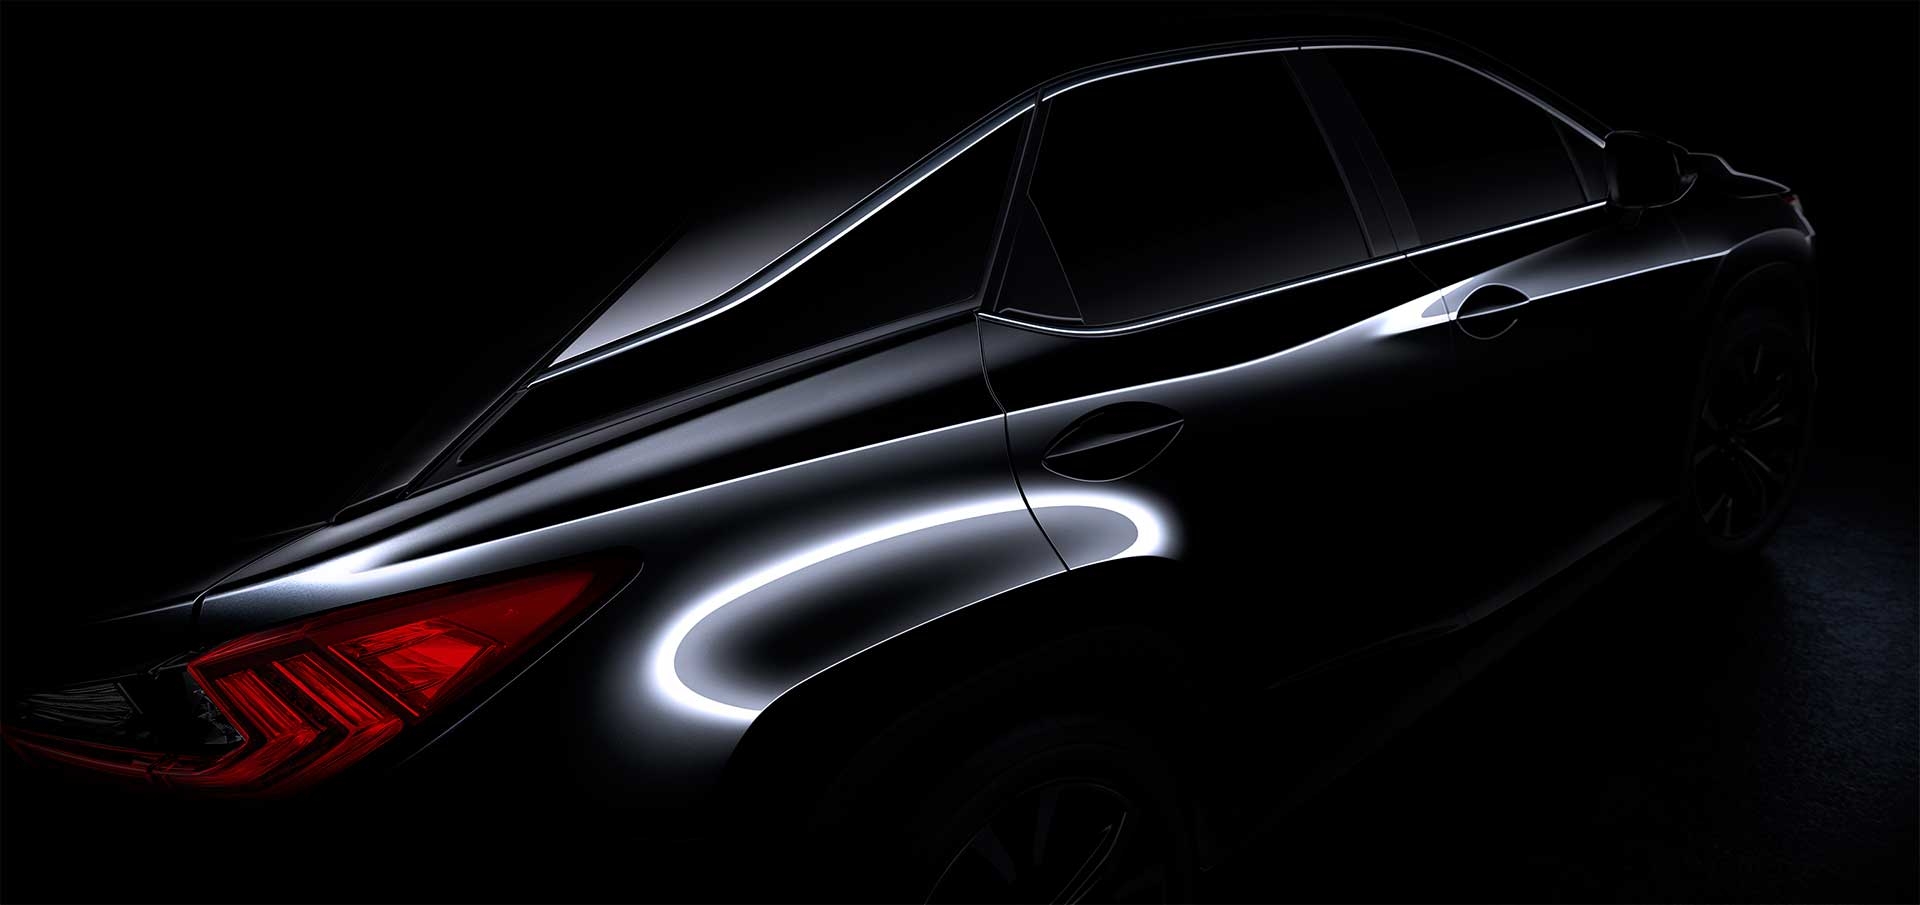 Worldwide tease for the Lexus RX: India debut at the 2023 Auto Expo